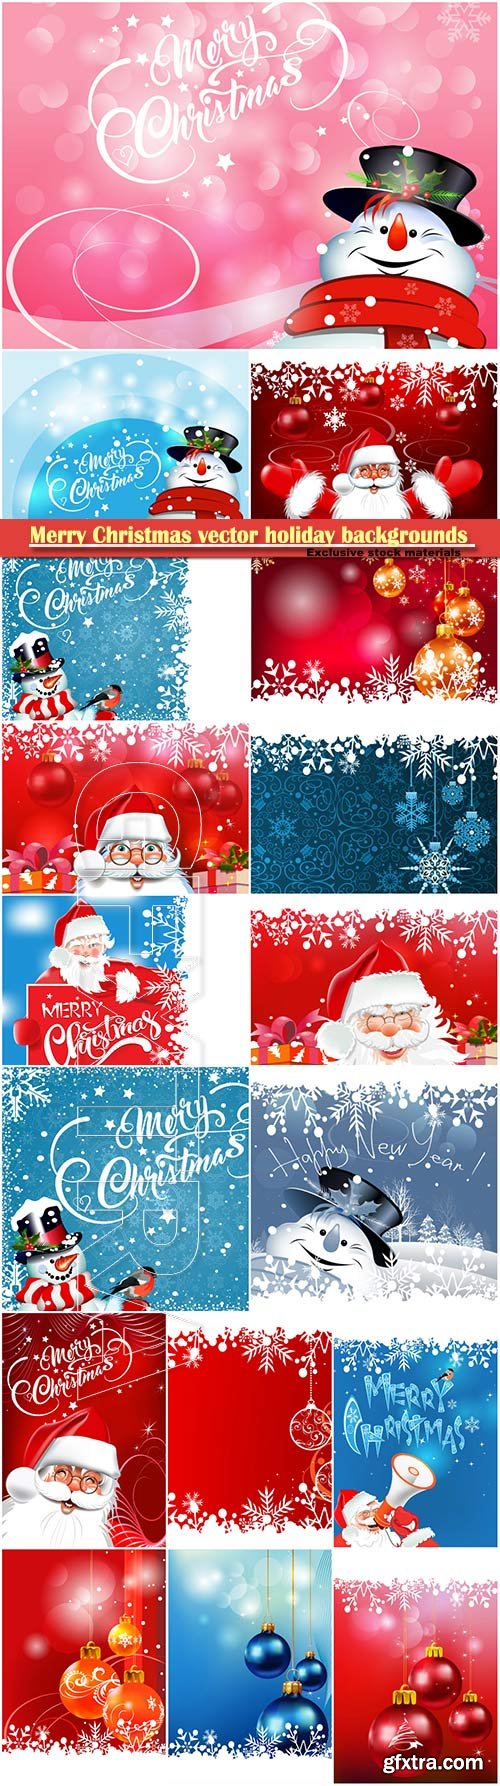 Merry Christmas vector holiday backgrounds, Santa Claus, snowman, Christmas decorations and snowflakes # 5